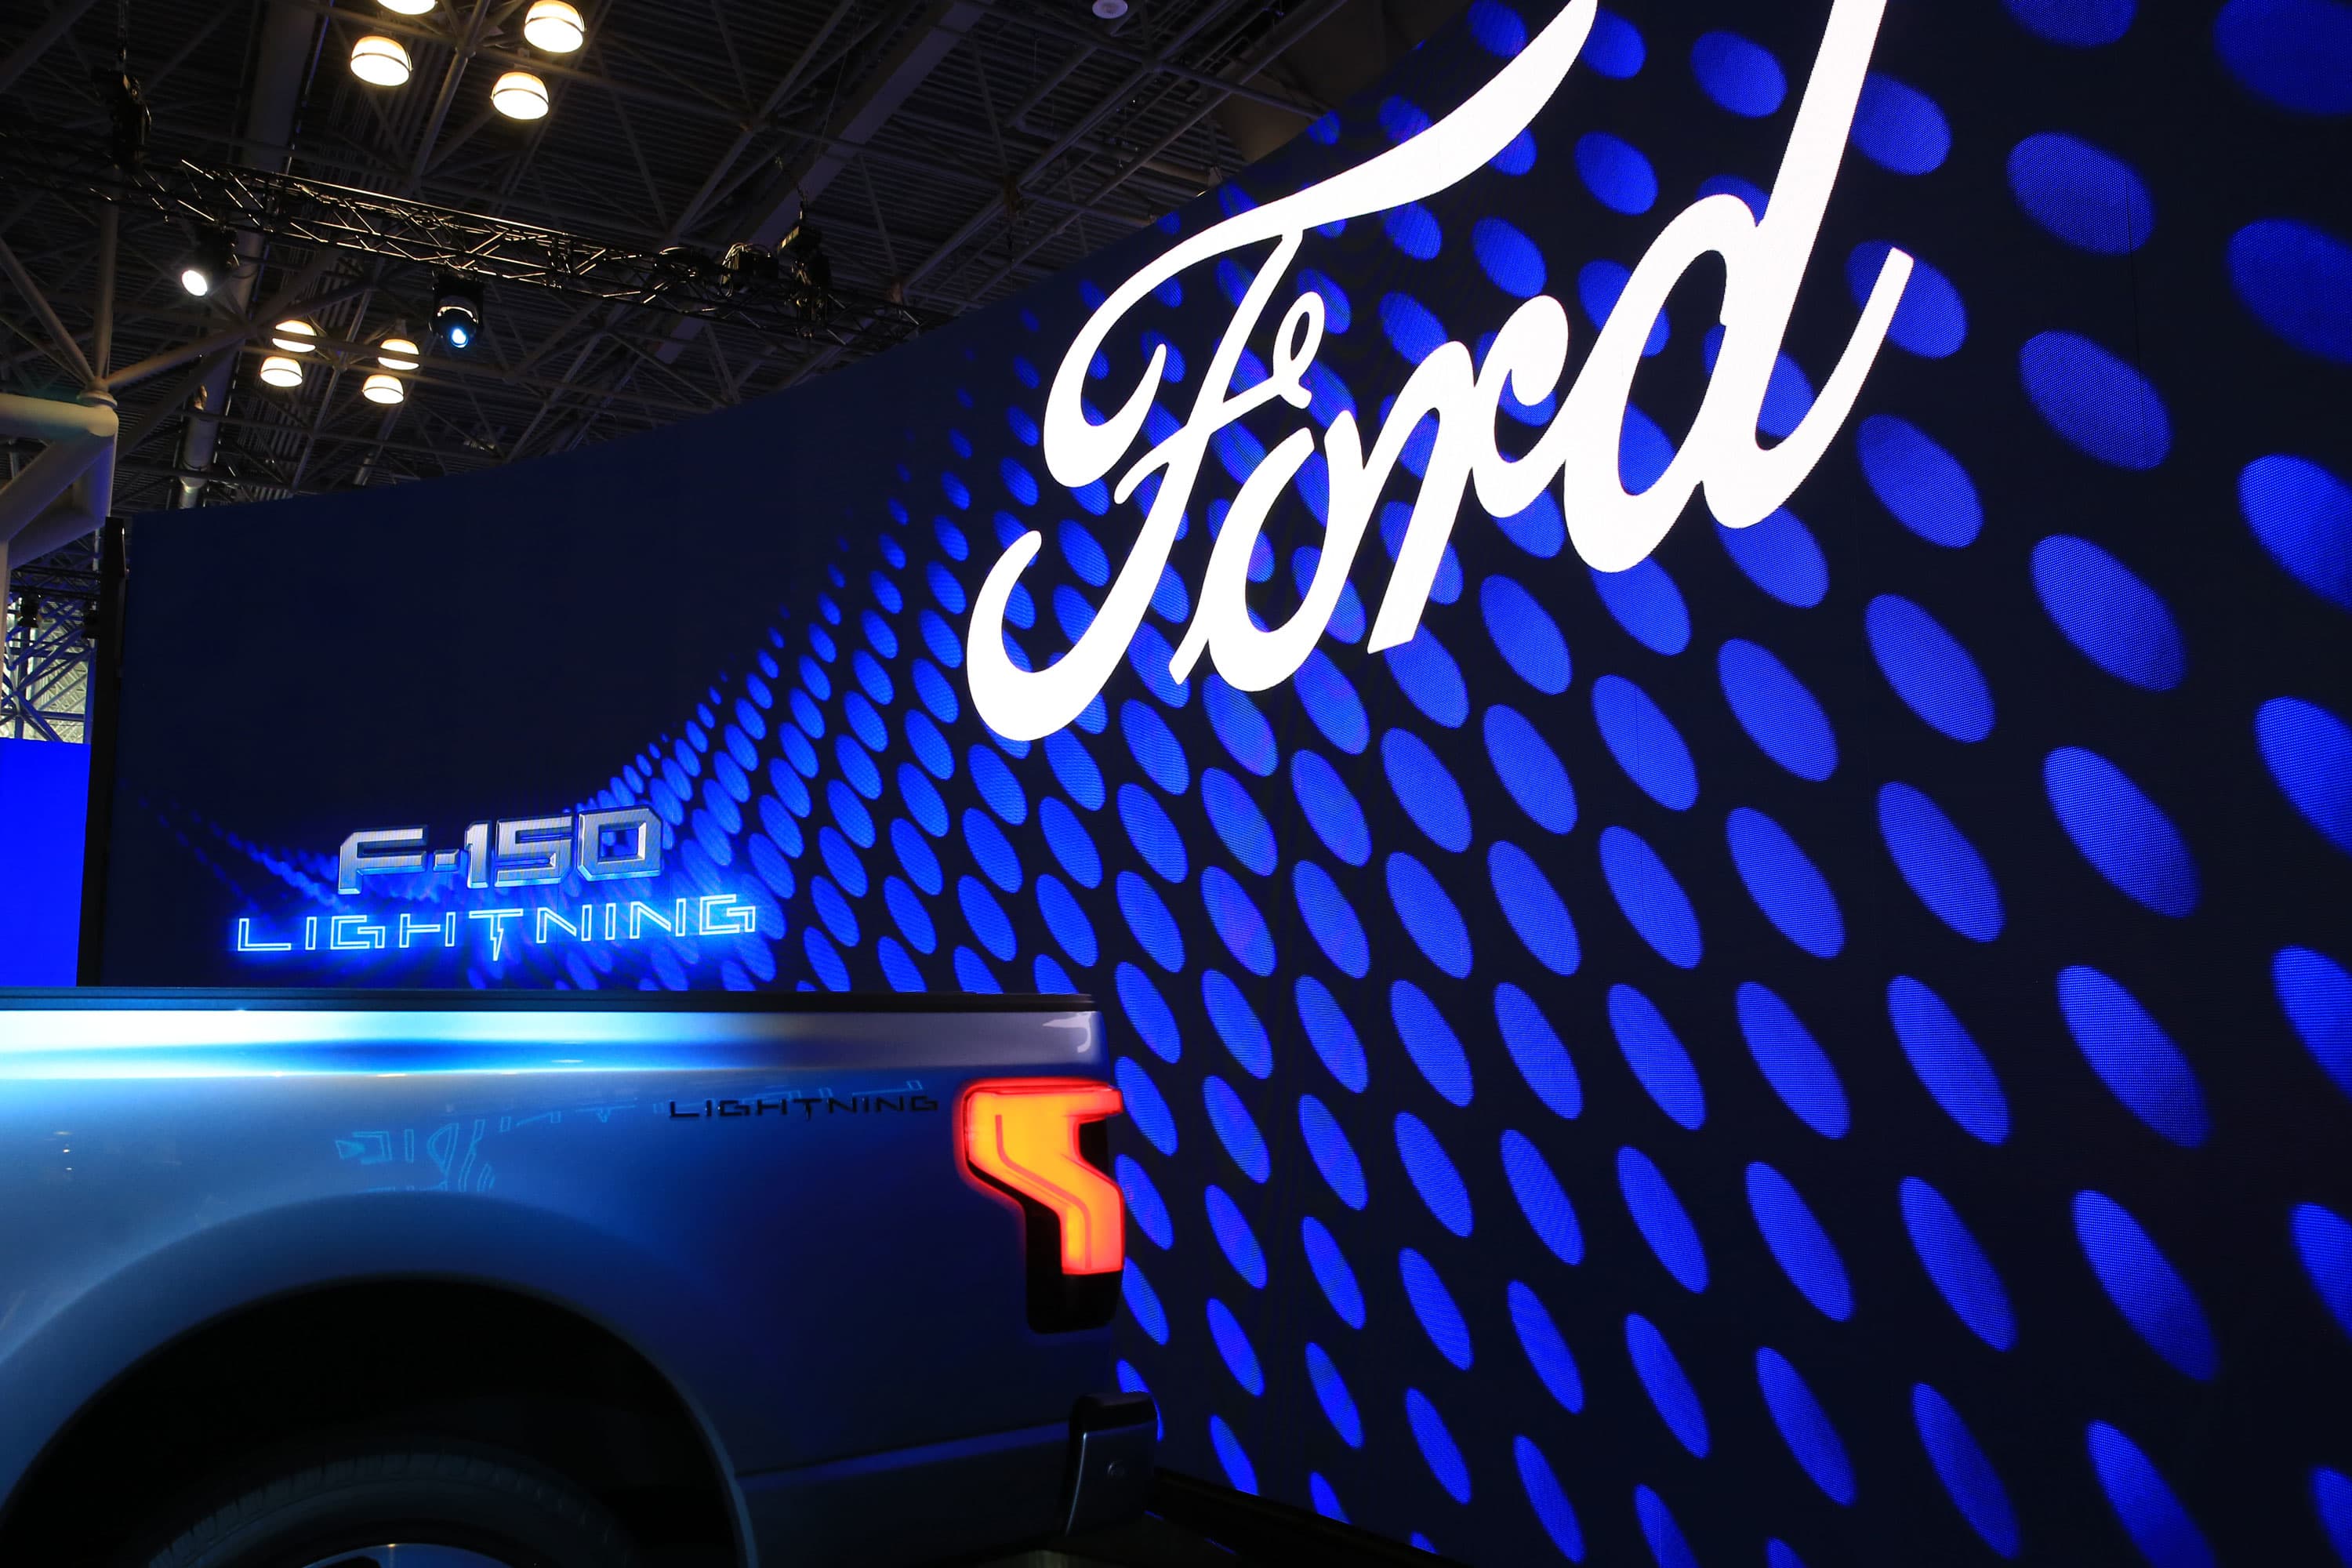 Deutsche Bank downgrades Ford, cites ugly fourth quarter and 'aggressive' 2023 guidance